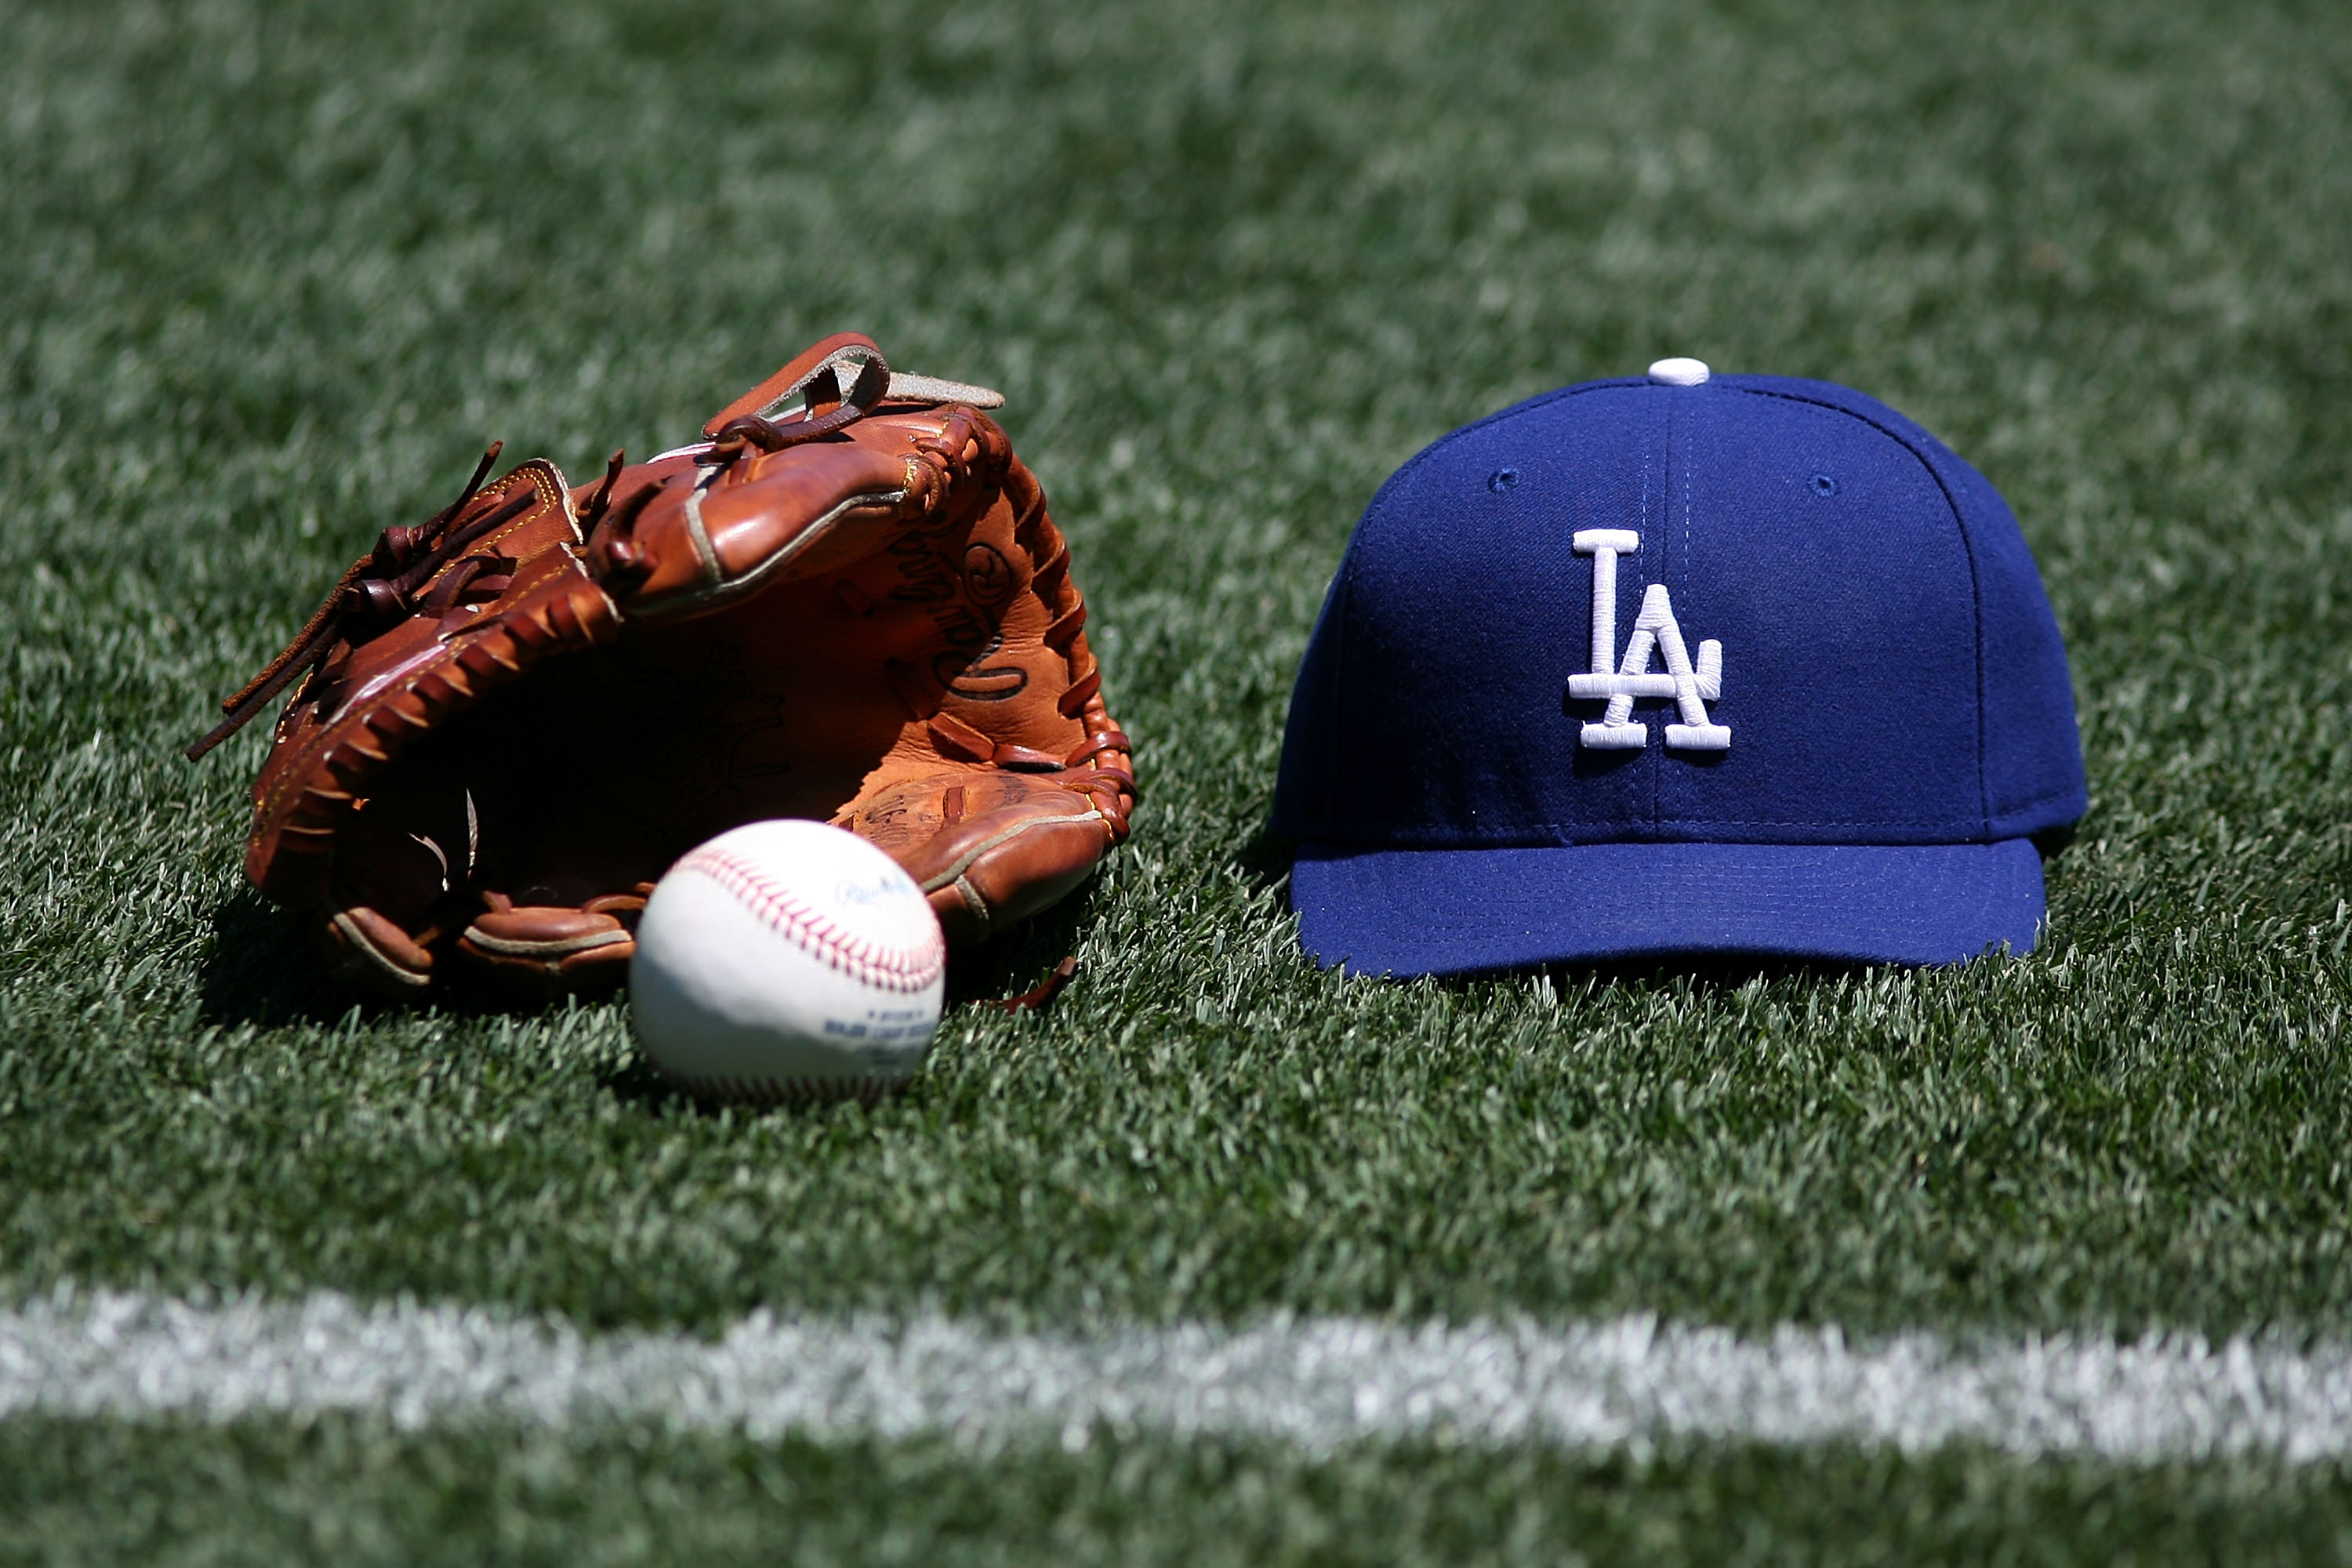 Los Angeles Dodgers v Los Angeles Angels of Anaheim